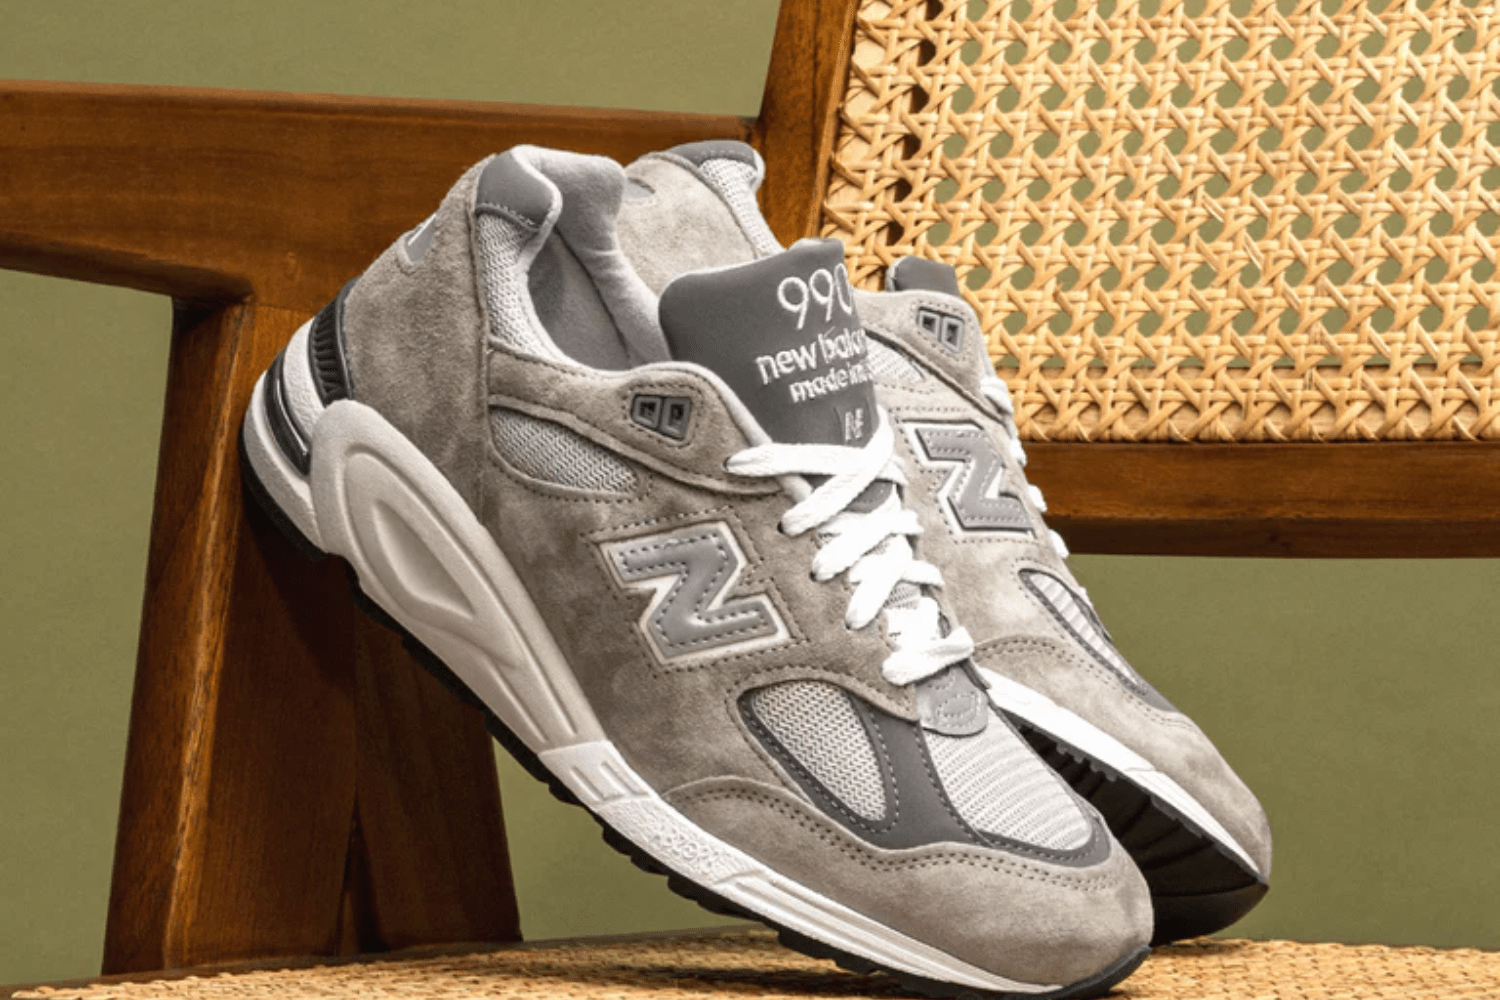 Profit from 20% off the New Balance 990 at Asphaltgold